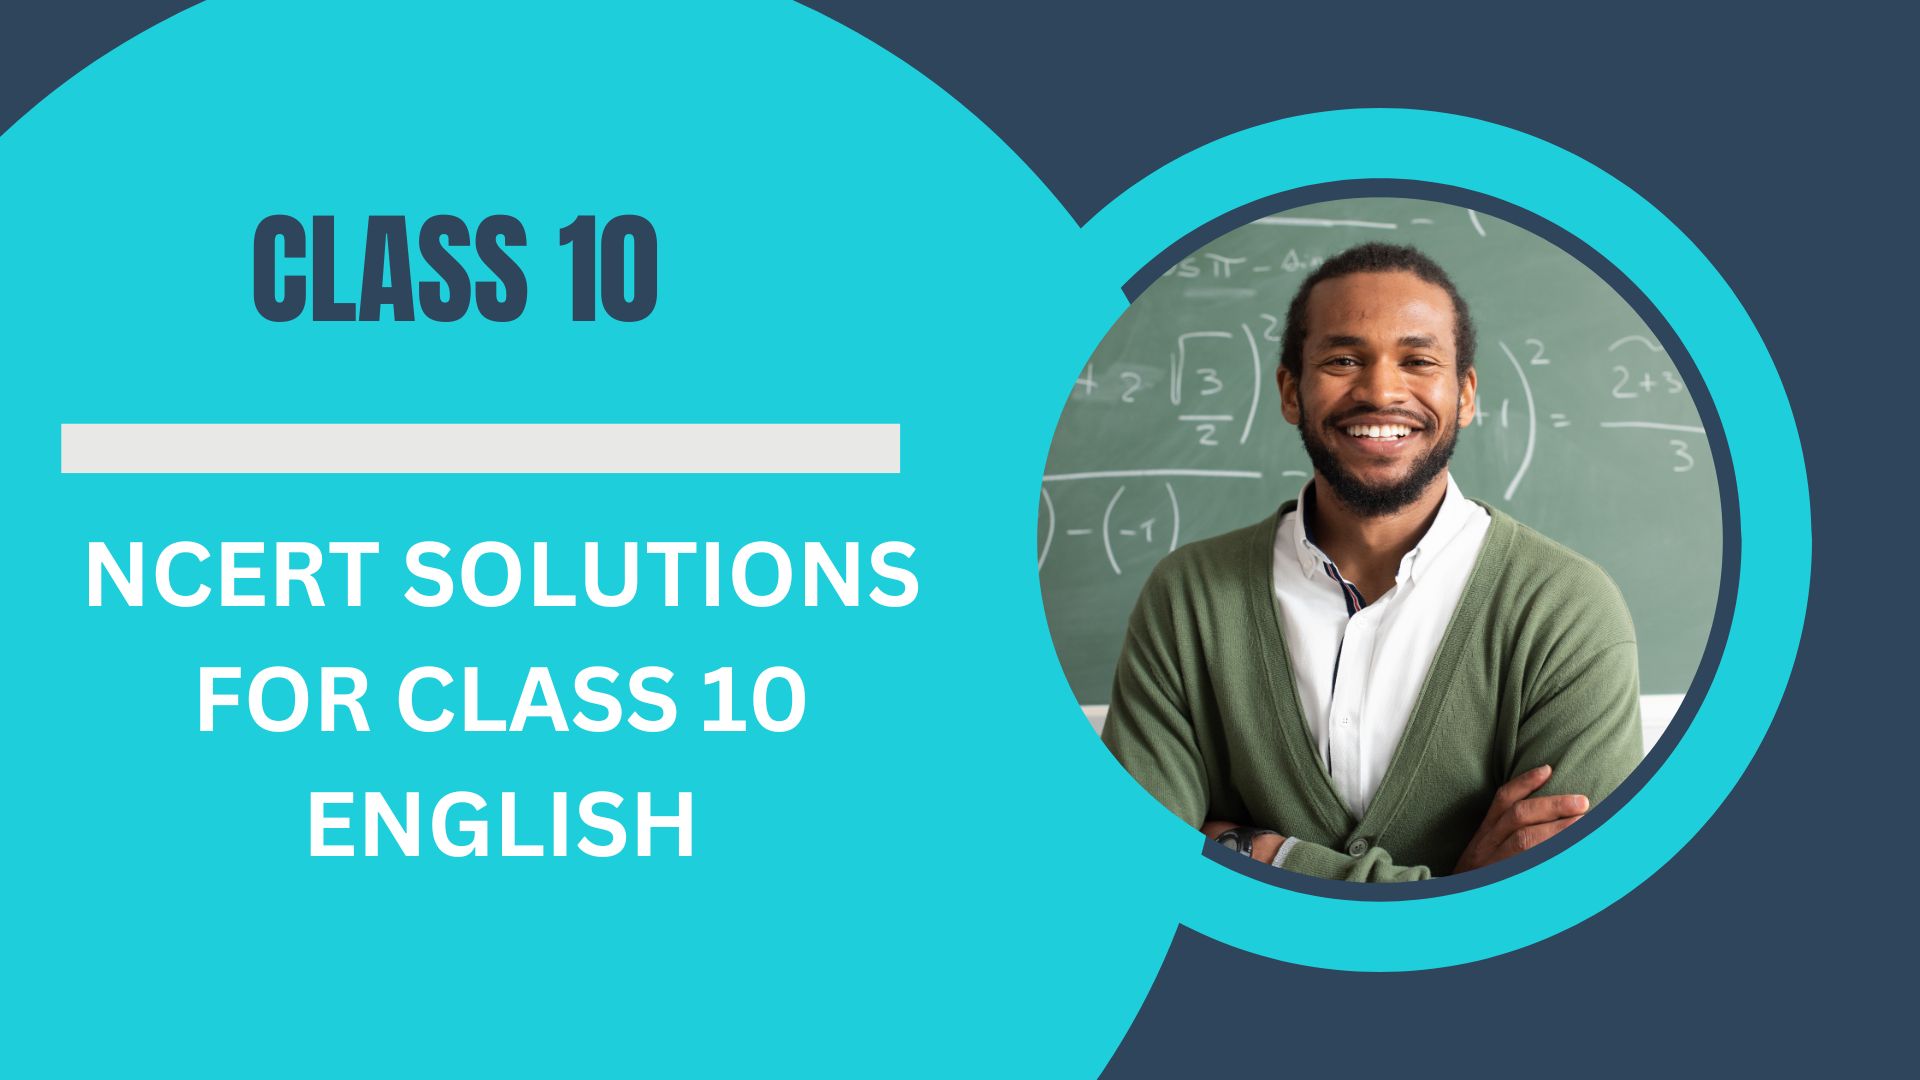 NCERT SOLUTIONS FOR CLASS 10 ENGLISH